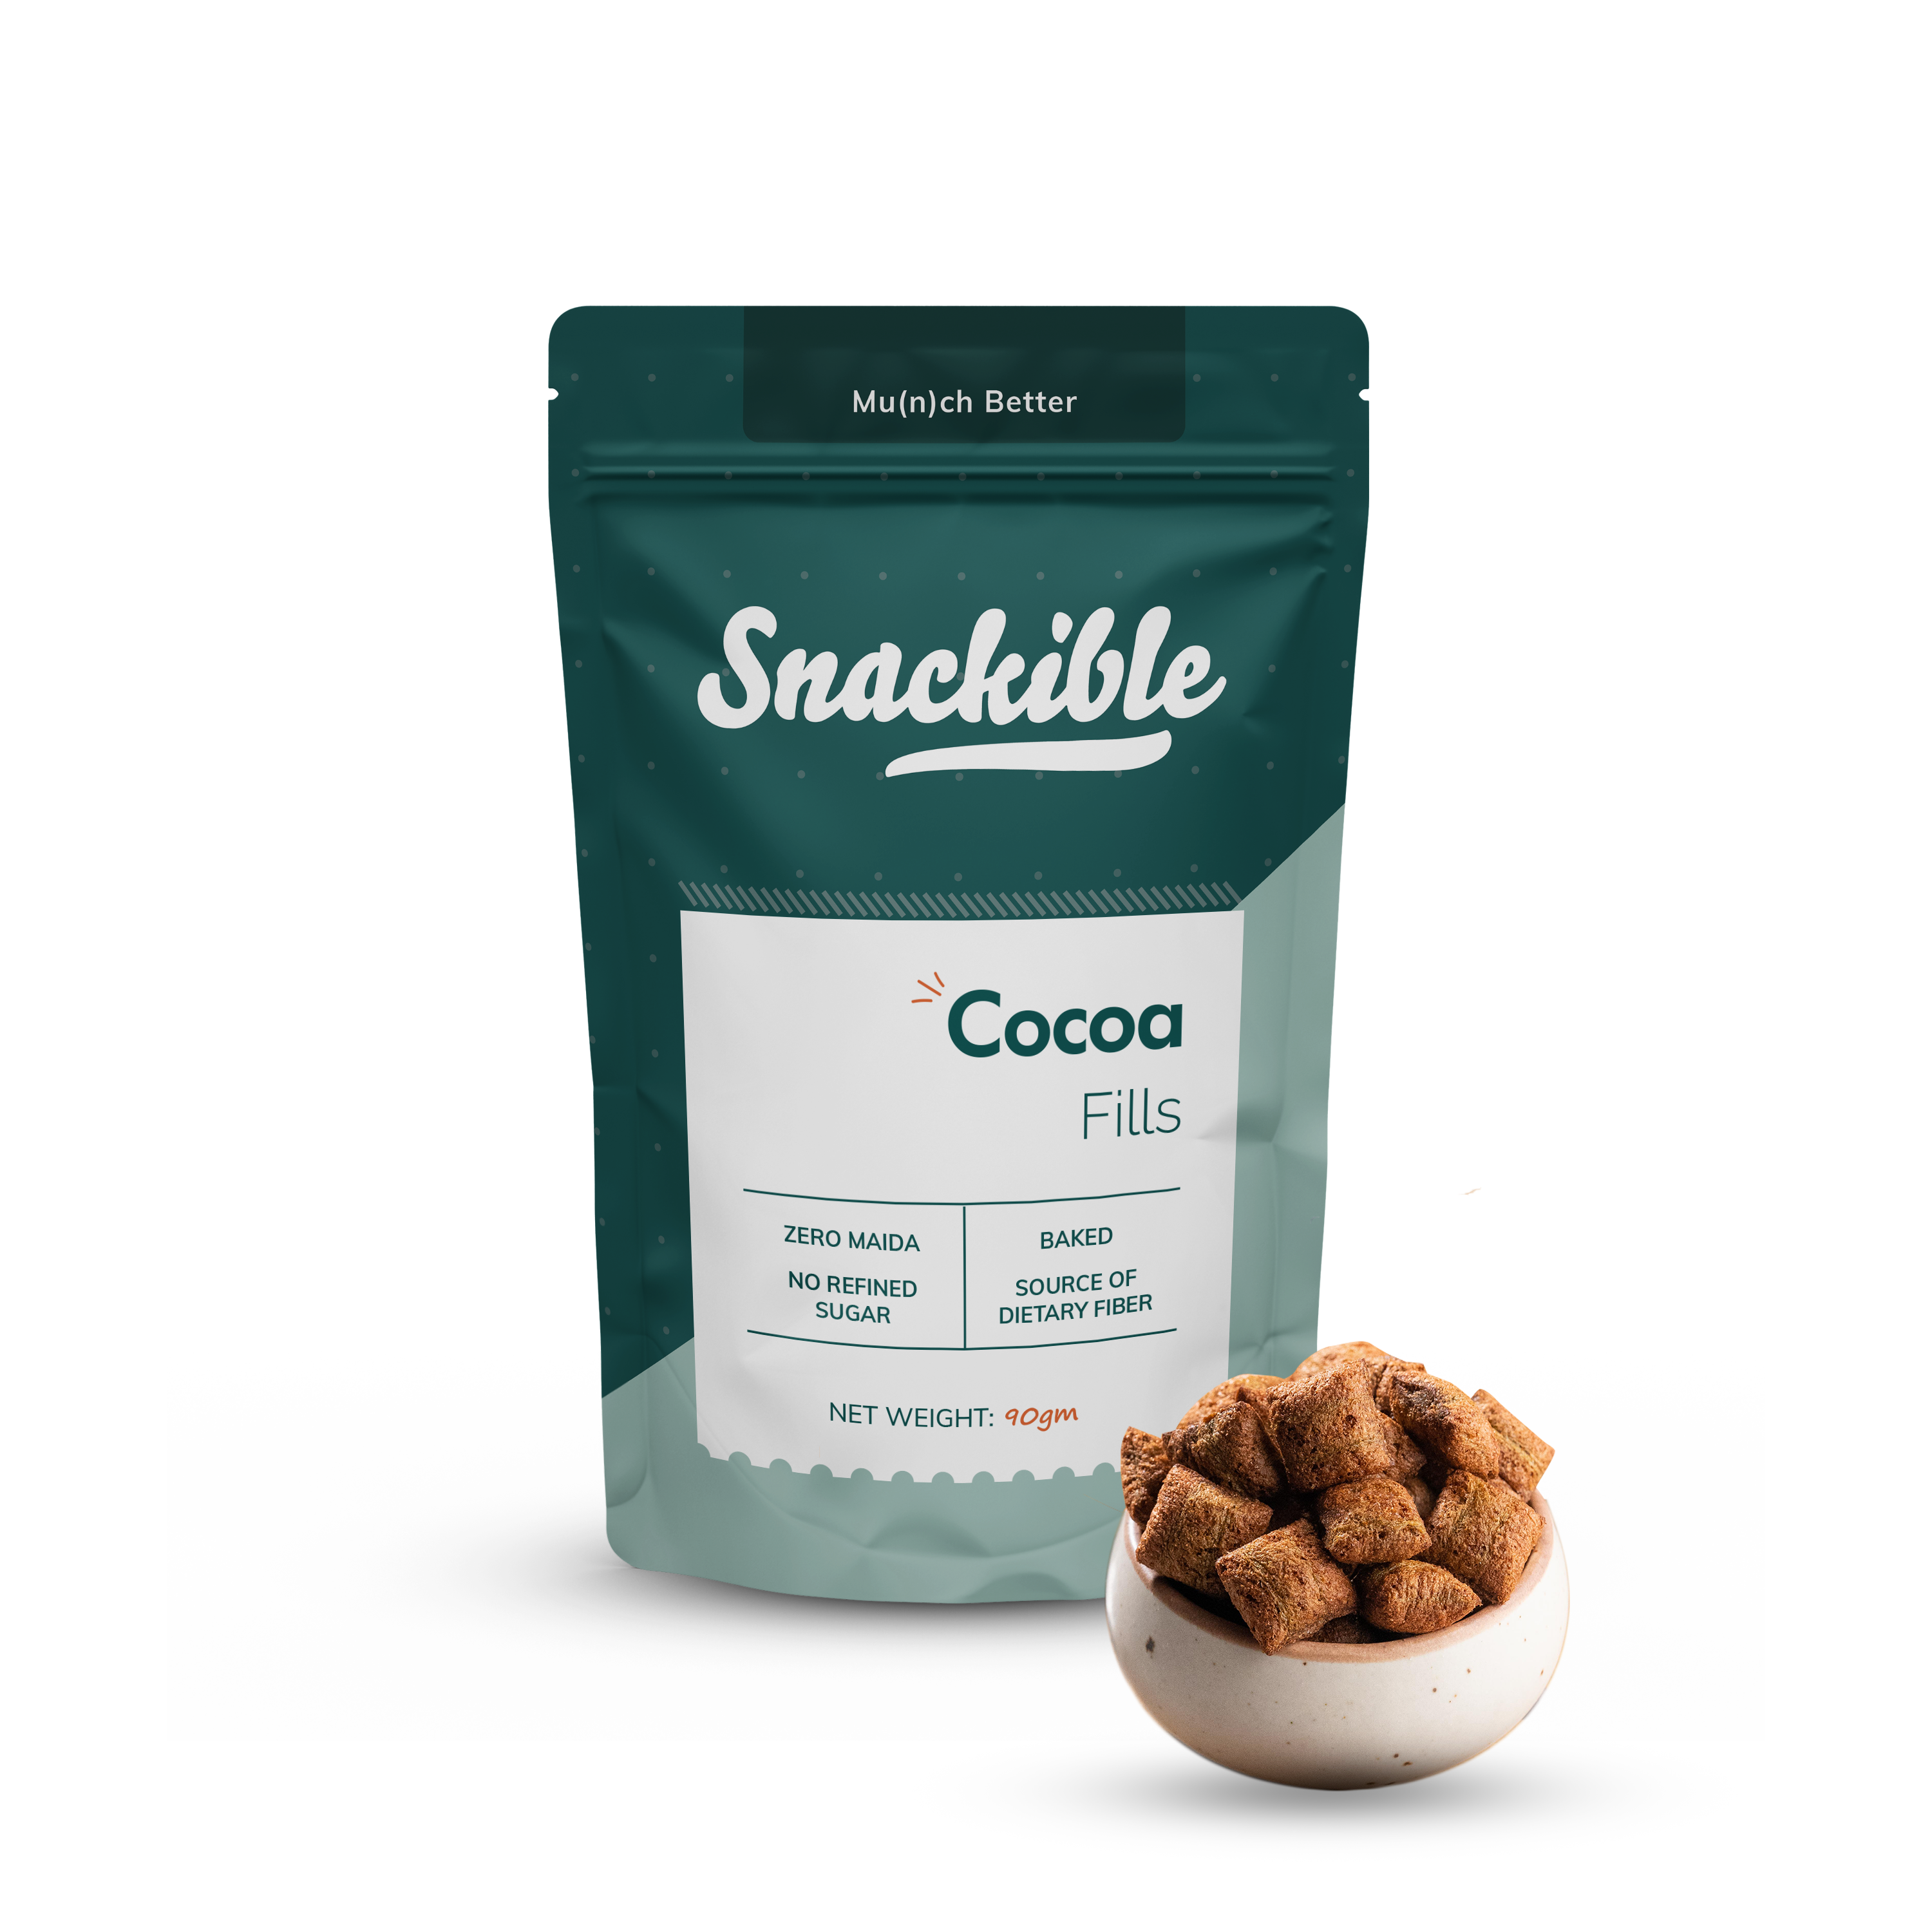 Snackible Cocoa Fills | Pack of 4 | 90gm each